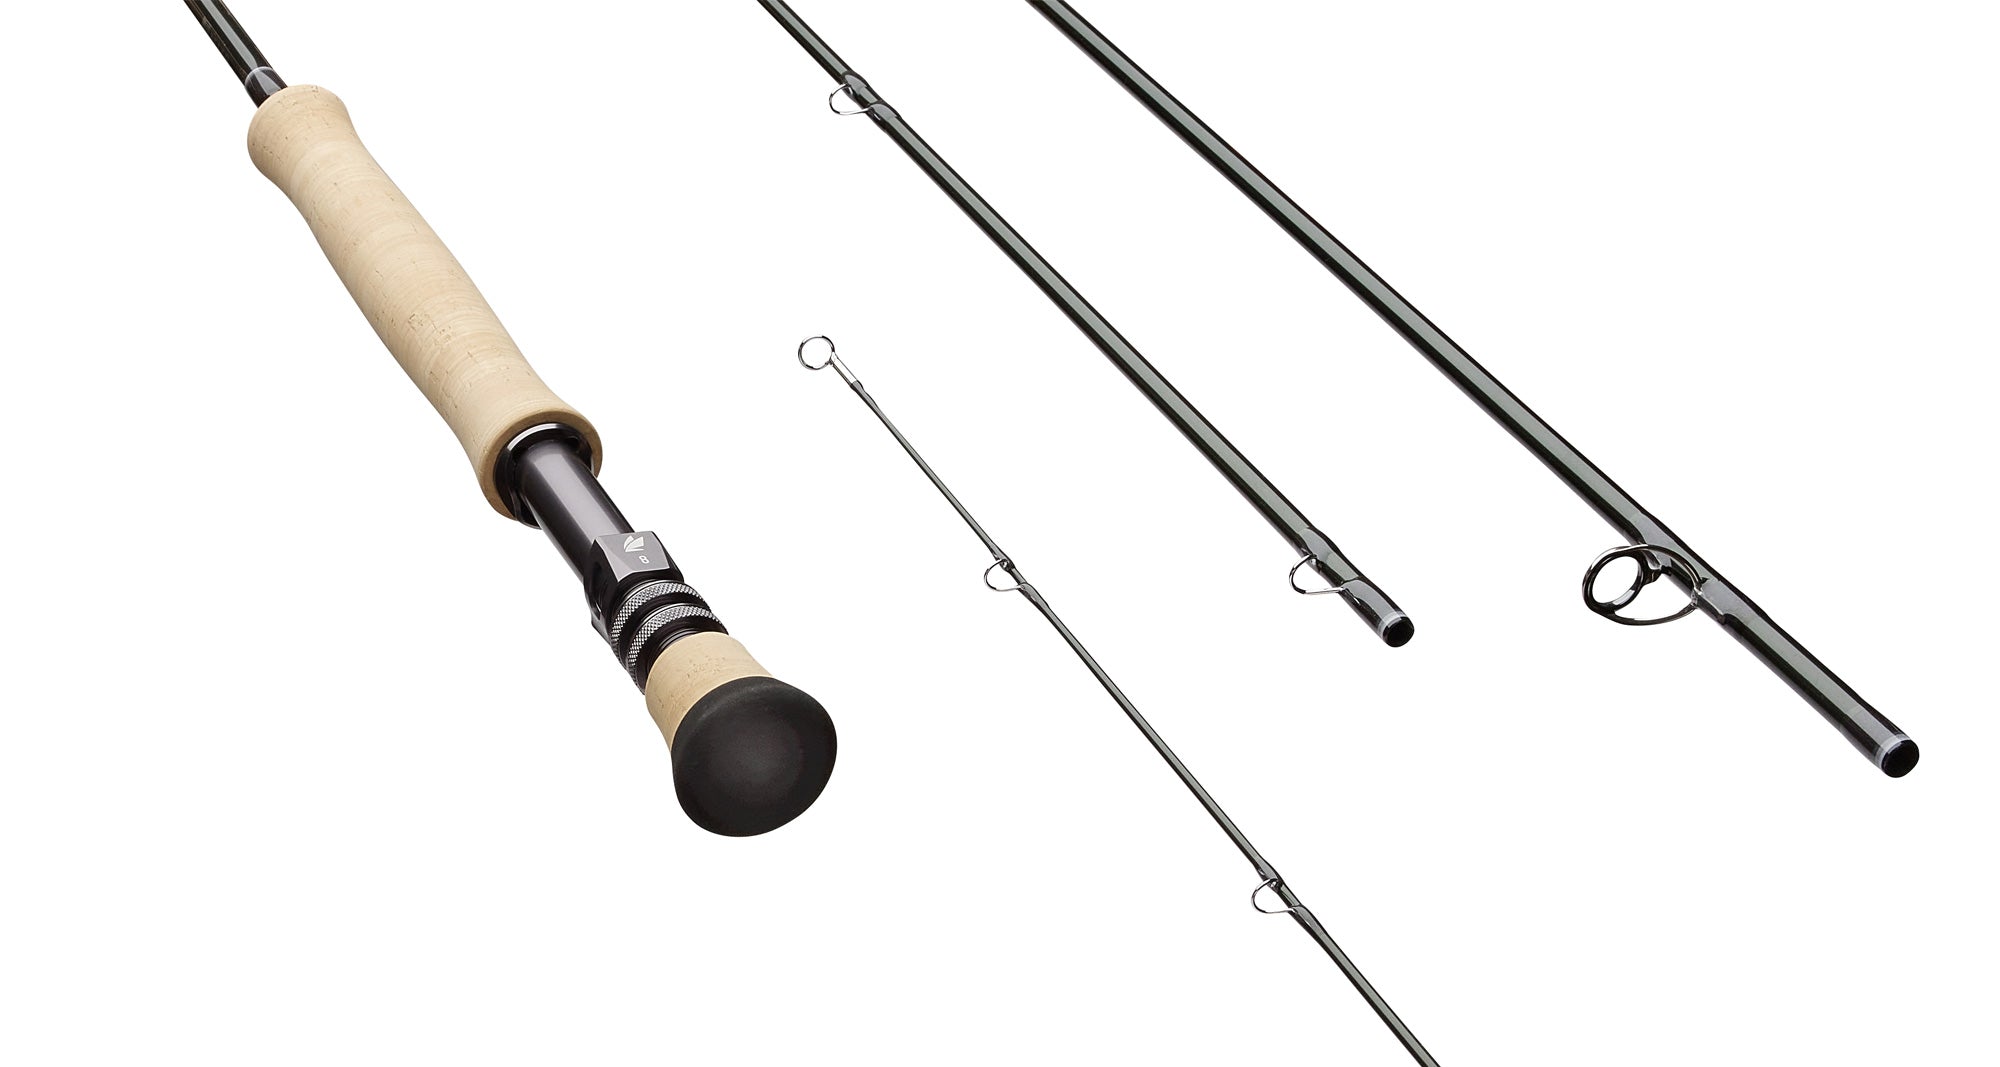 Premium backing for all fly fishing applications. — Red's Fly Shop